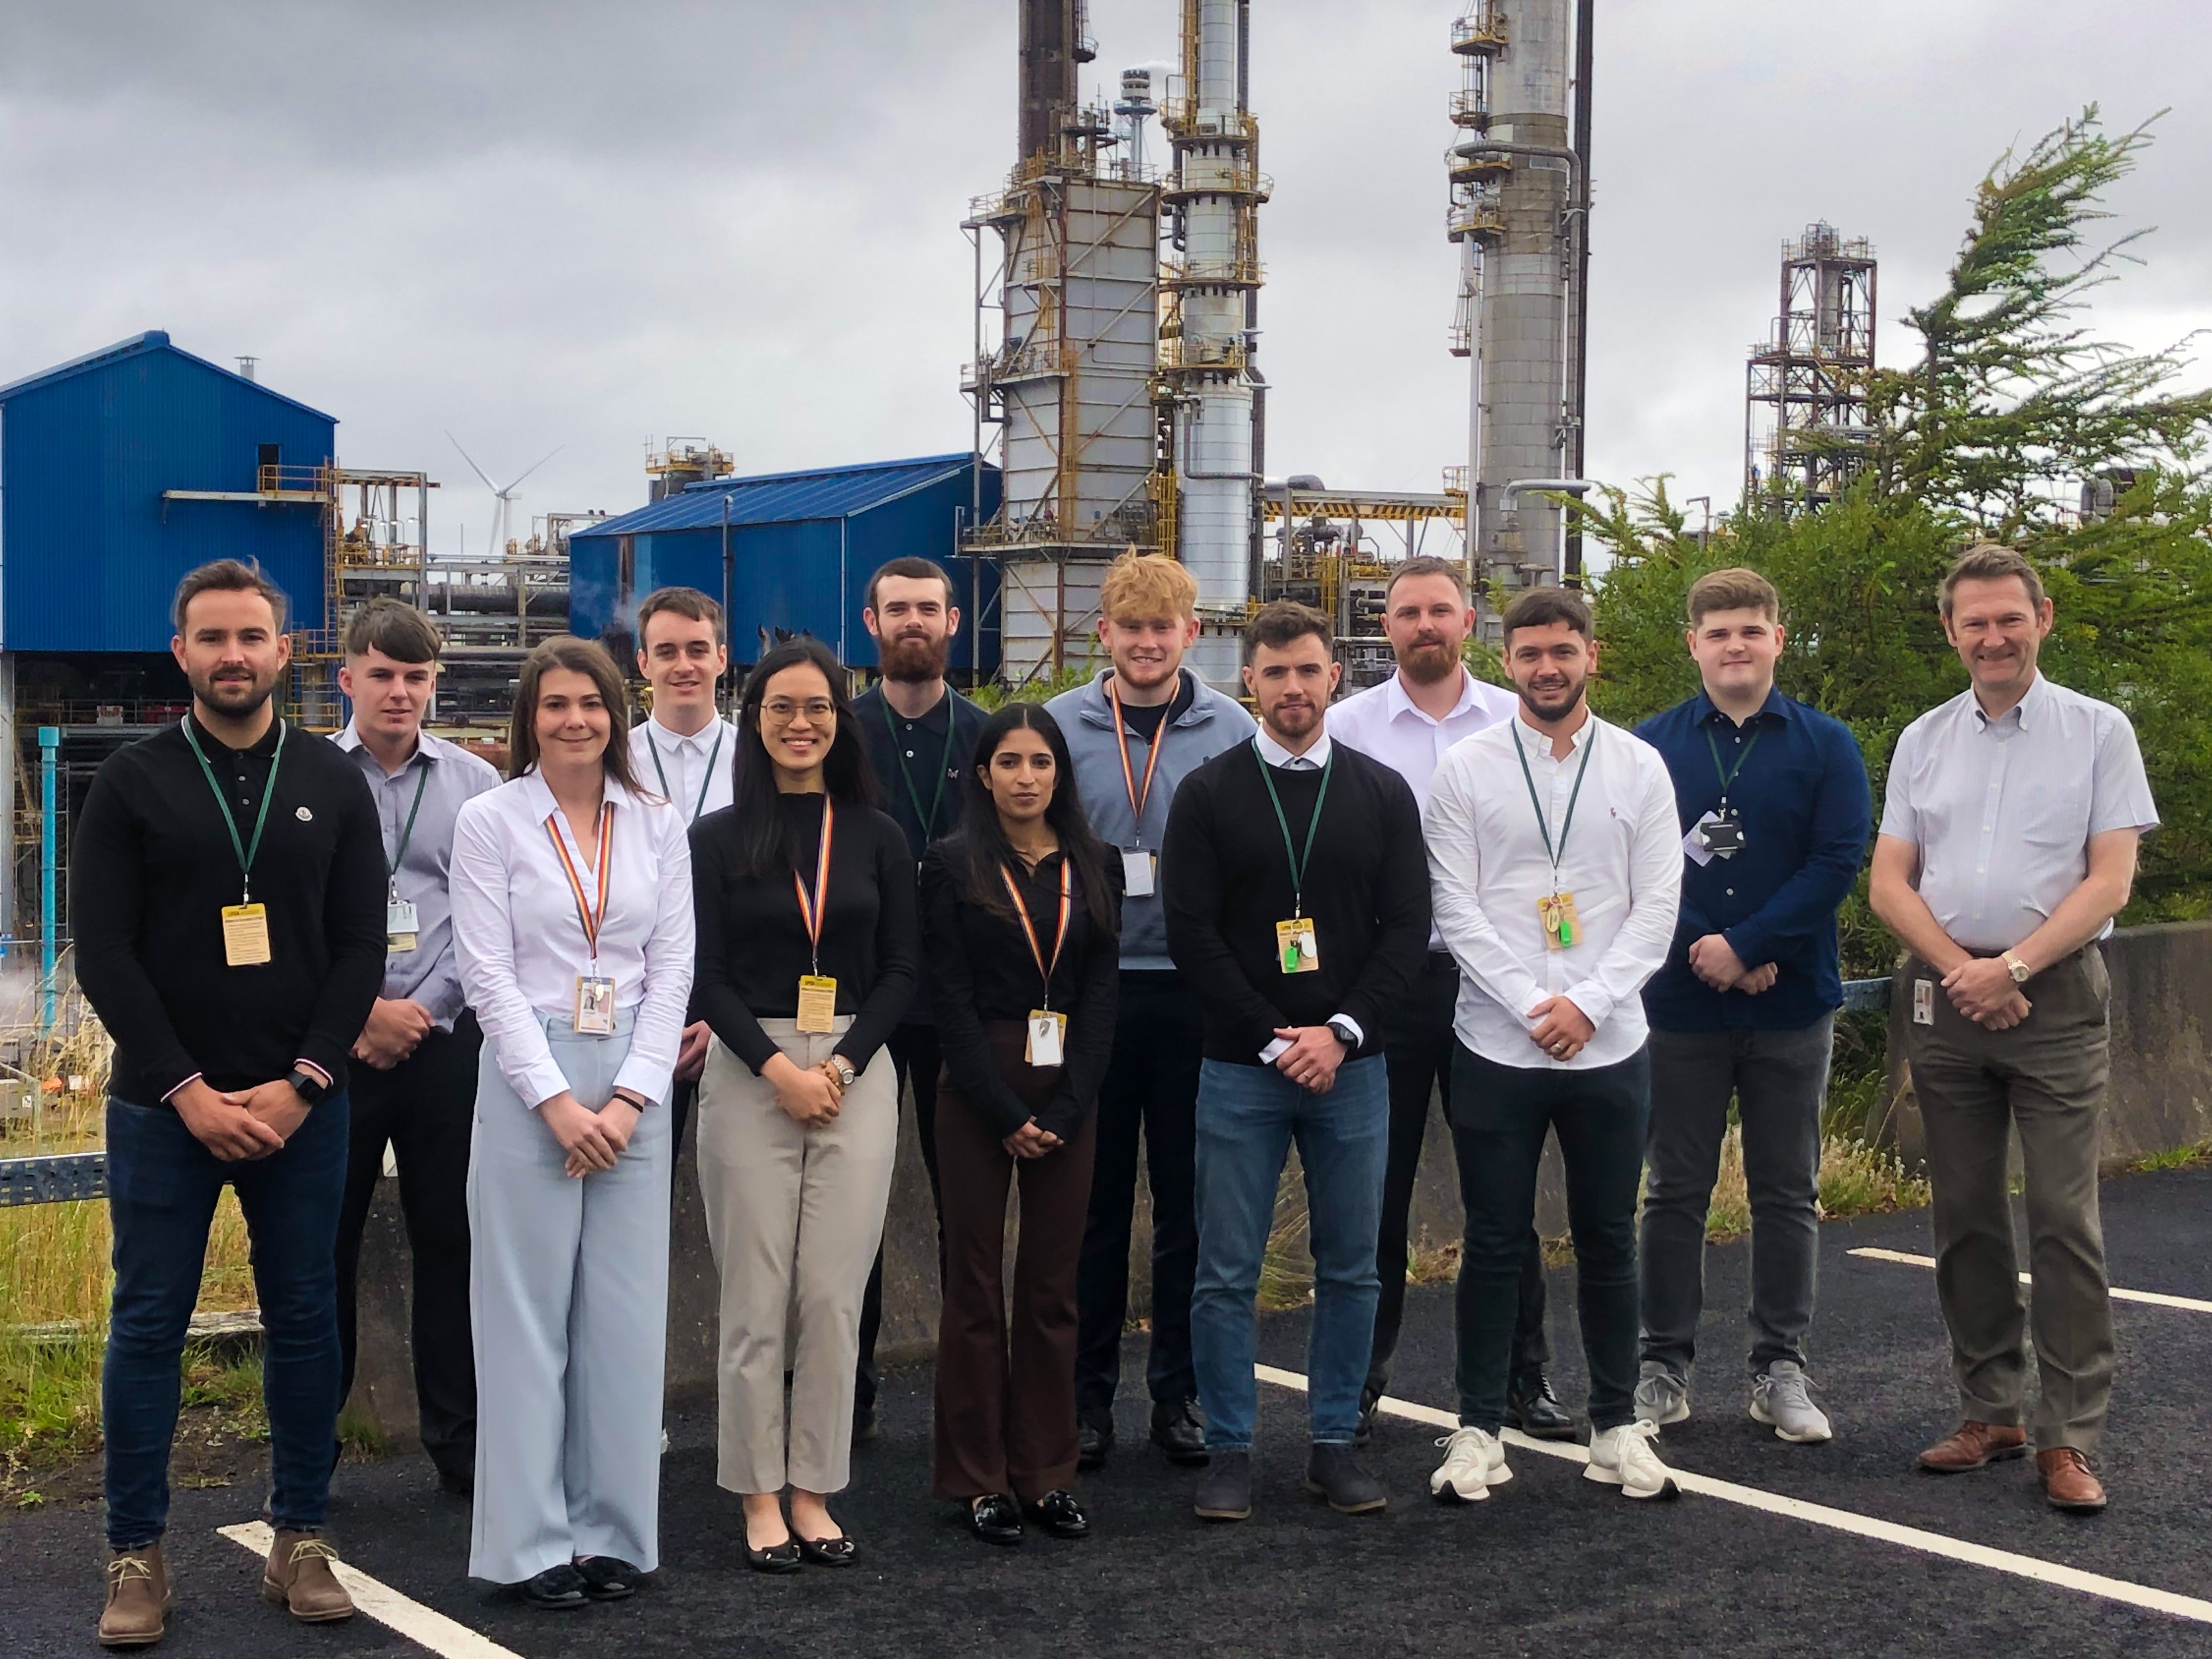 Image The new recruits will carry out a variety of roles, from the maintenance and repair of equipment, to admin duties and vital planning and process tasks to assist the plants role in the manufacturing of ethylene